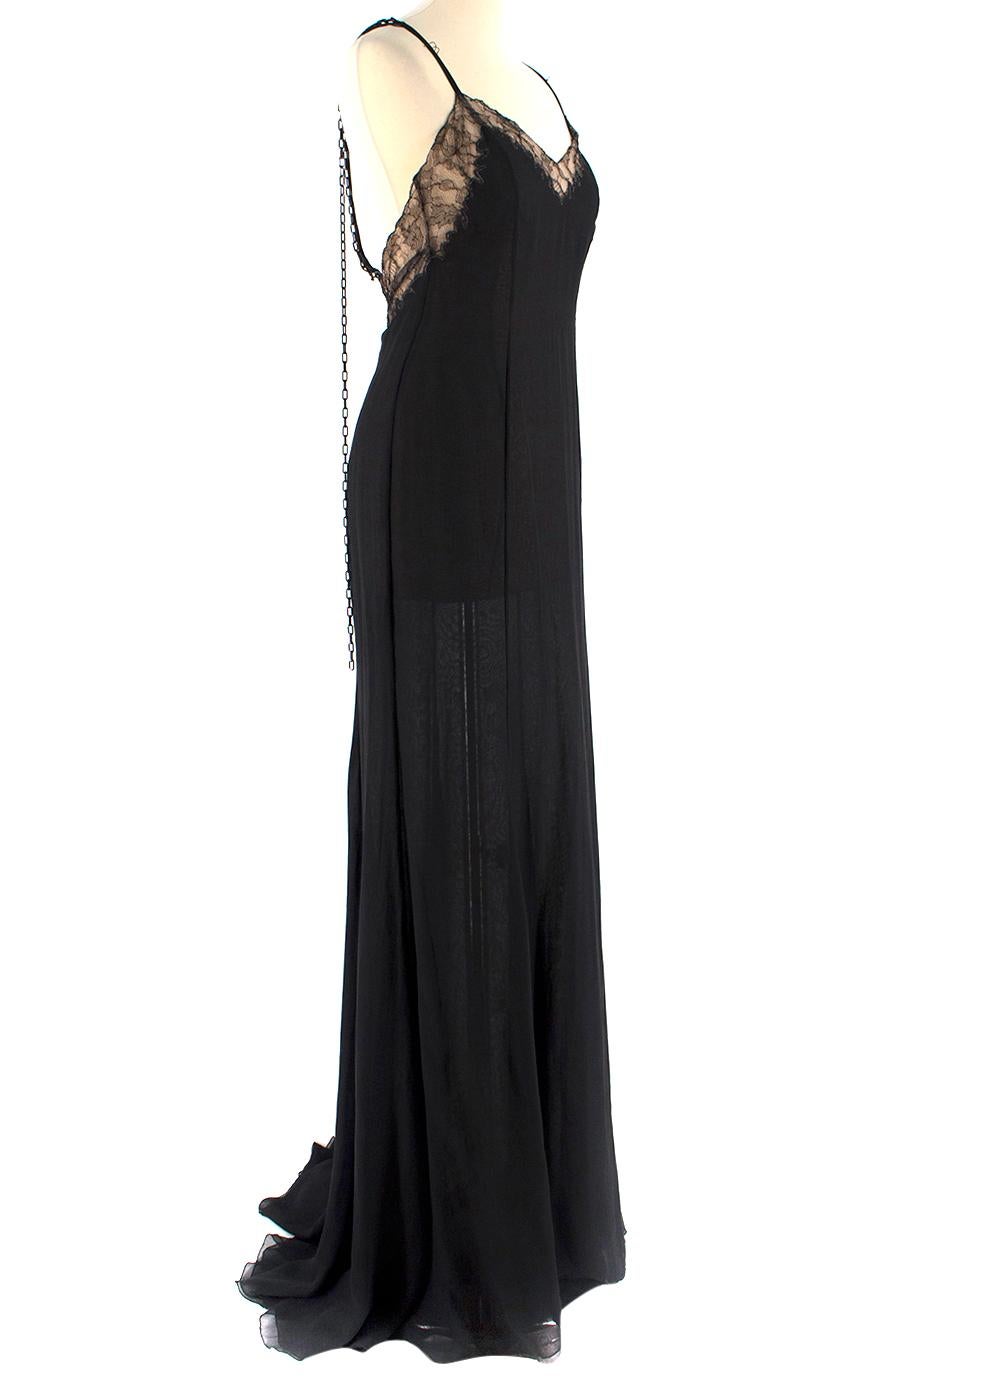 Versace Black Silk Gown Slip Dress with Chain Details

- Slip gown silk dress
- Embellished with beige lace to the trim 
- V neckline 
- Open back
- Spaghetti straps embellished with chain details
- Sheer
- Unlined
- Hidden zip fastening to the side